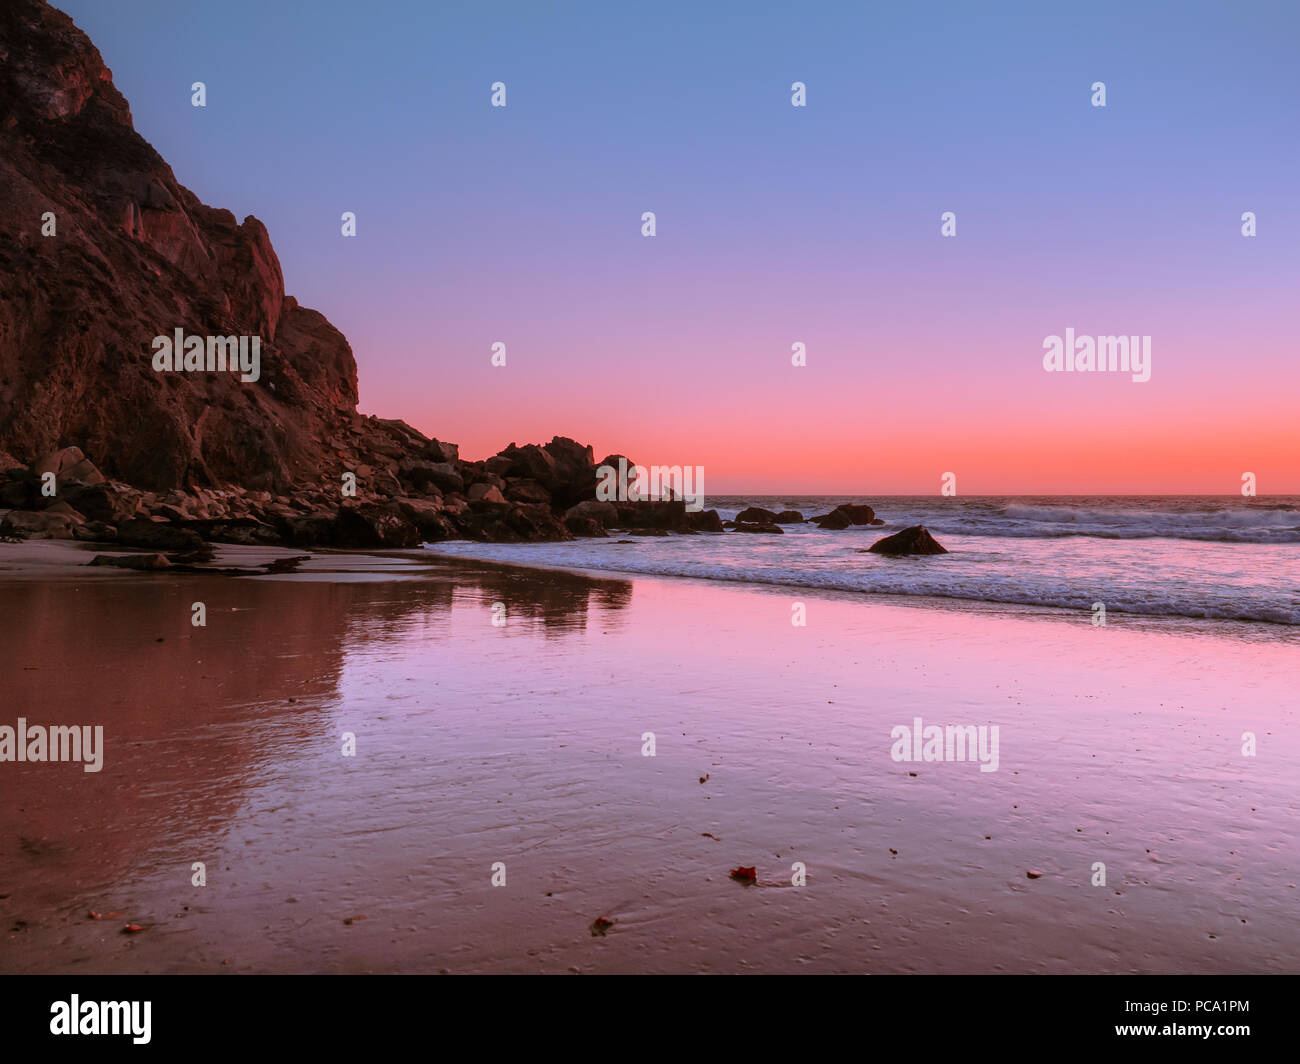 Famous Pfeiffer Big Sur Beach at sunset. Rocky cliff on the California coast. Low tide exposes the wet sand with sharp texture in the foreground. Stock Photo